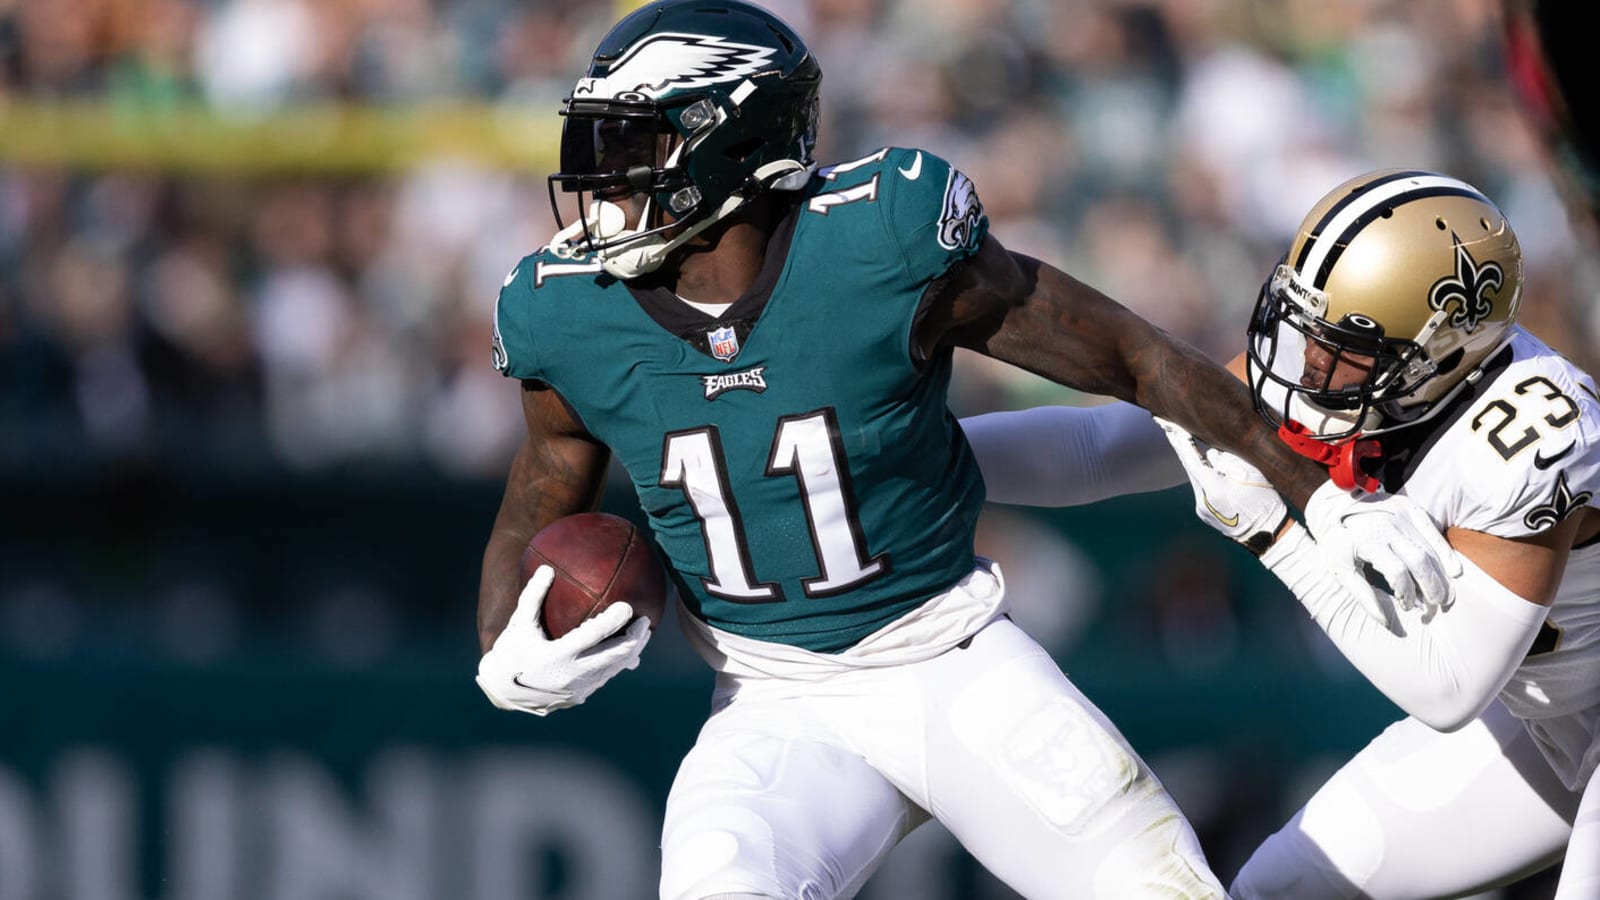 Getting receiver A.J. Brown was highlight of Eagles' draft, Taiwan News